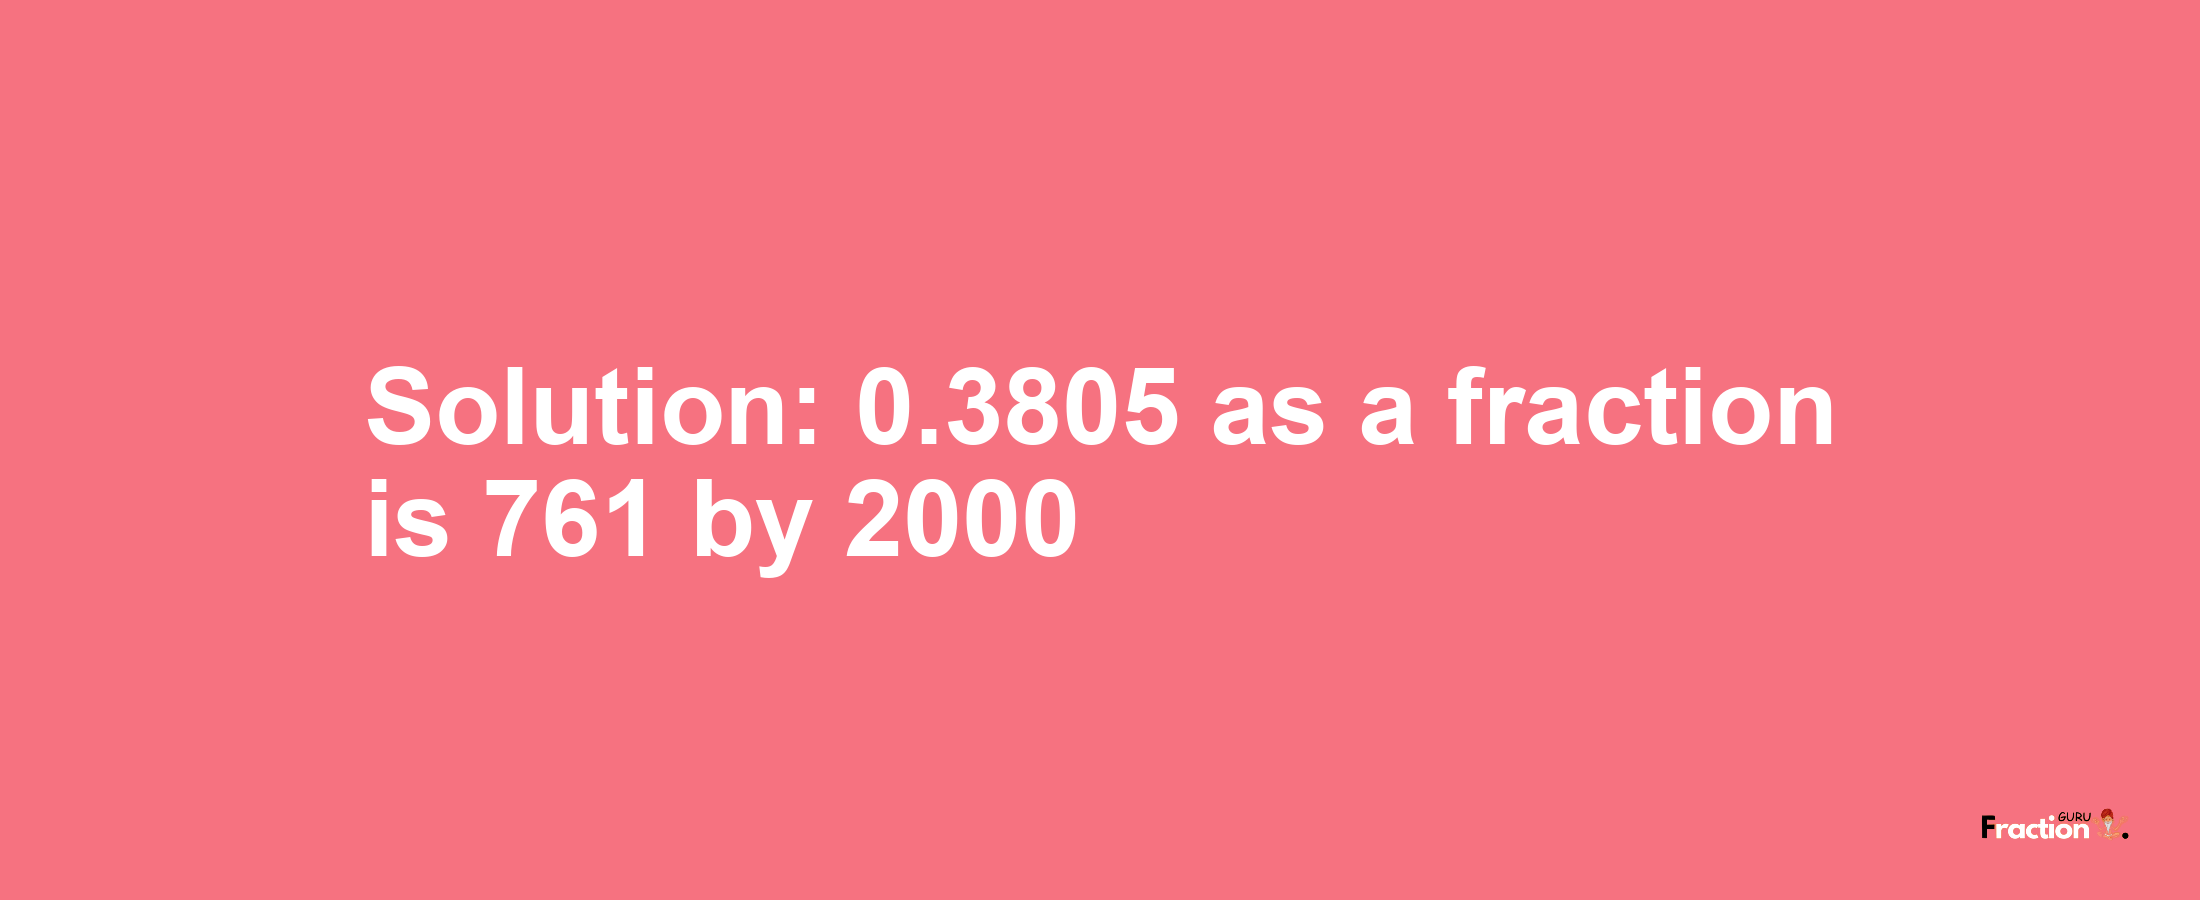 Solution:0.3805 as a fraction is 761/2000